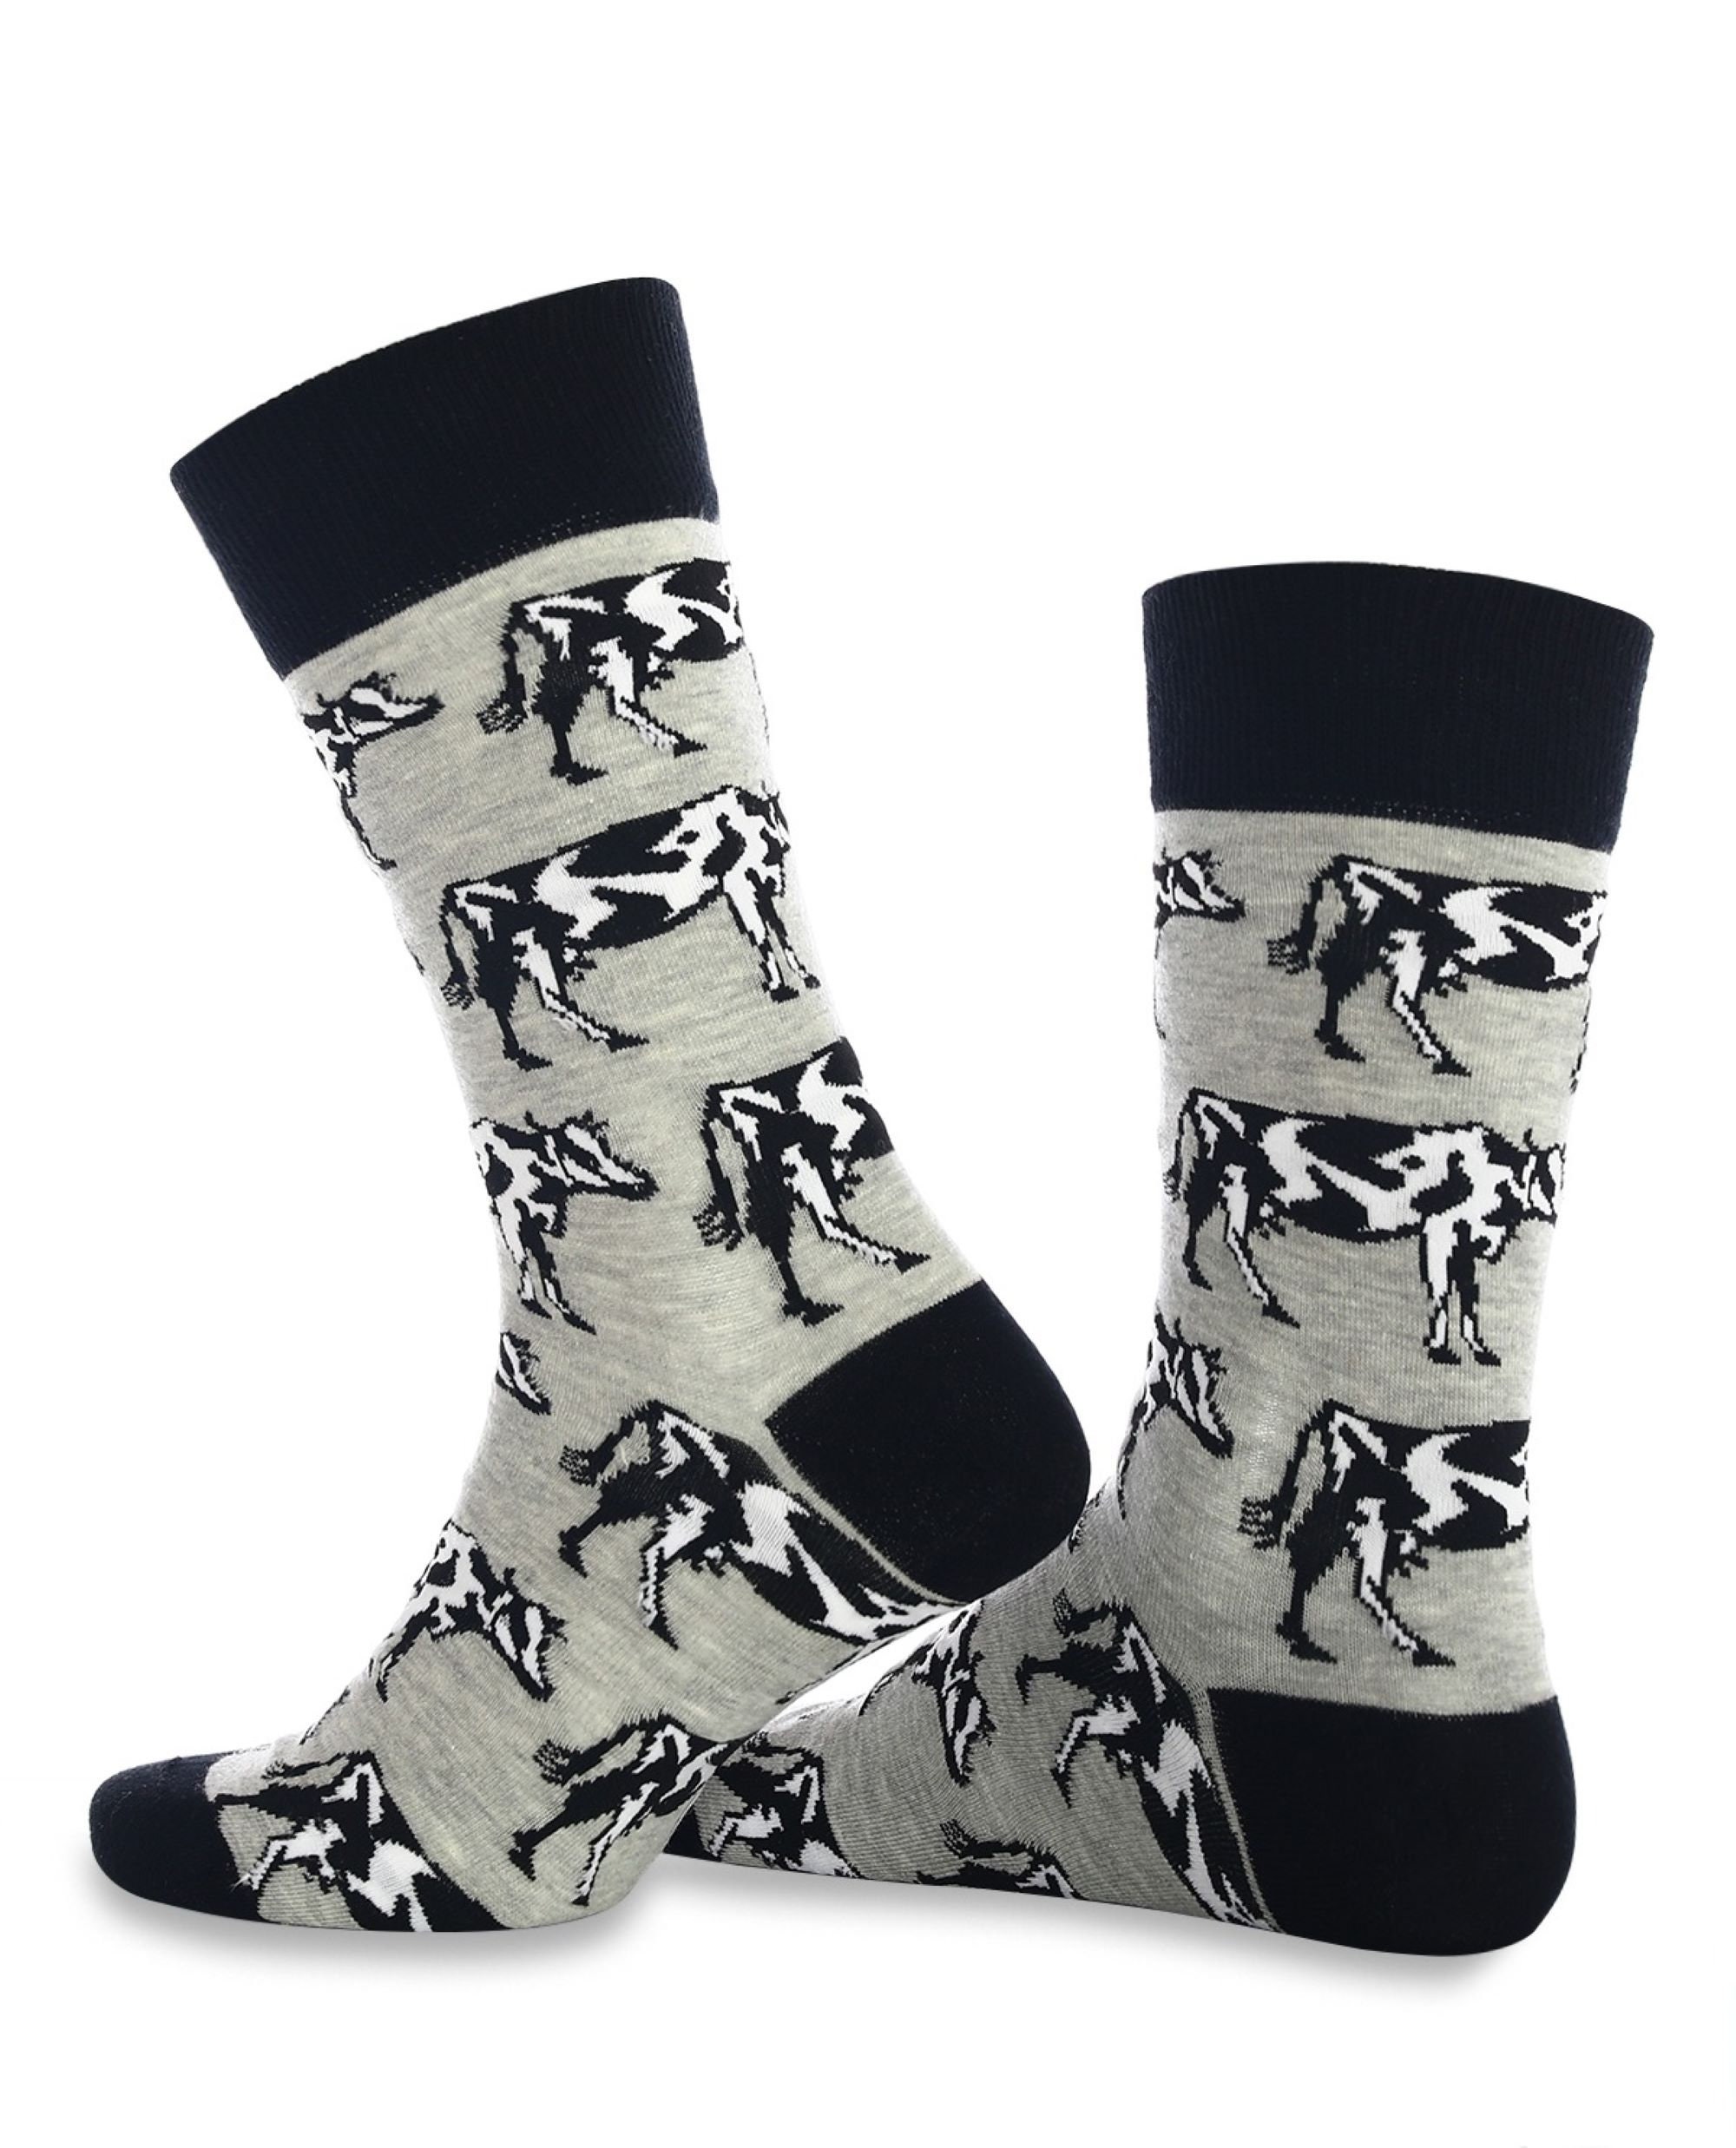 Cow Mens Cotton Socks | Gift Idea Novelty Funky Cool Funny UK Size 7-12